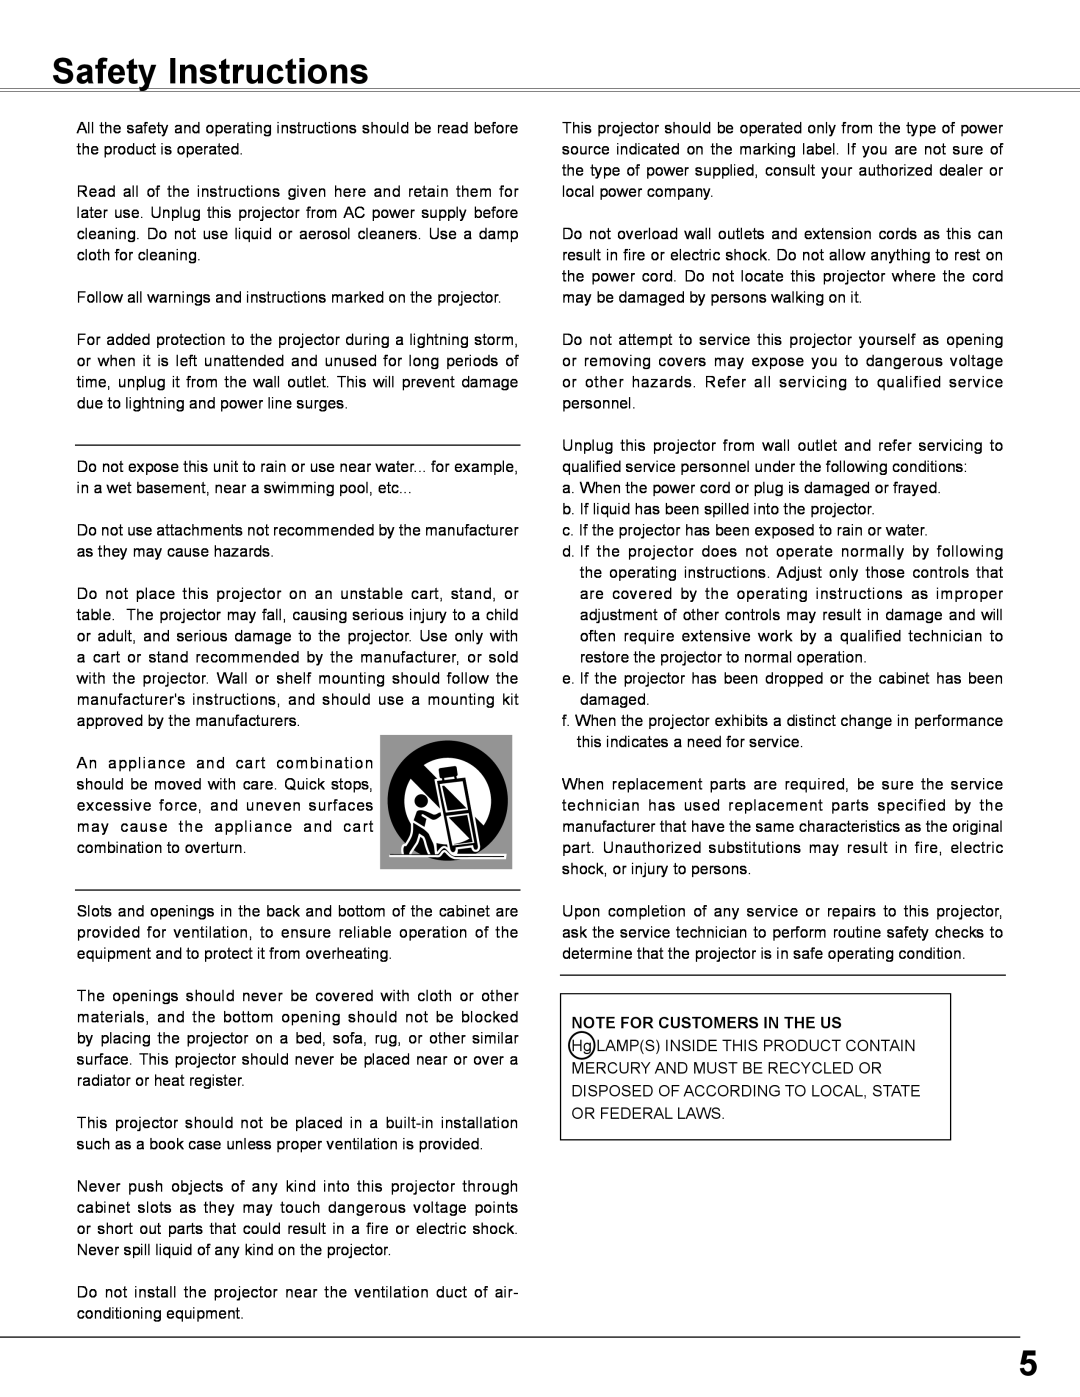 Sanyo PLC-WXL46 owner manual Safety Instructions, Note For Customers In The Us 